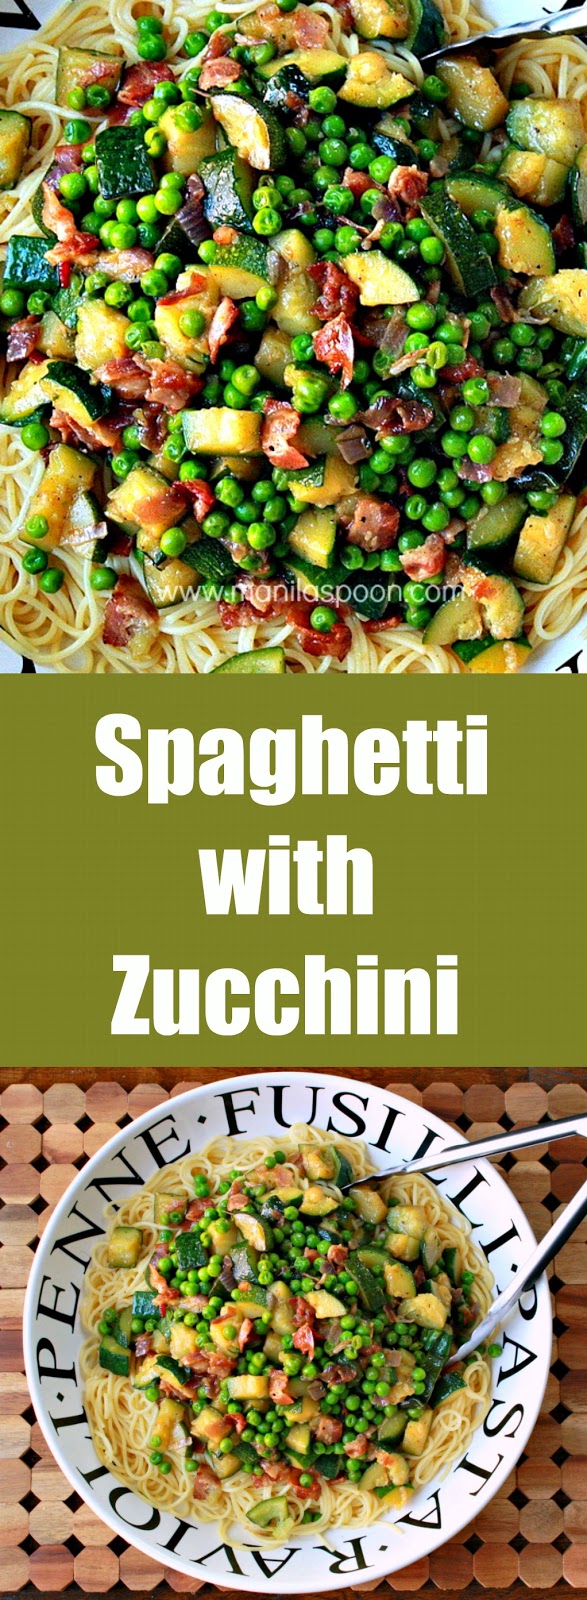 A delicious and easy way to use up Zucchini. We've thrown in some Bacon for good measure! Spaghetti with Zucchini | manilaspoon.com